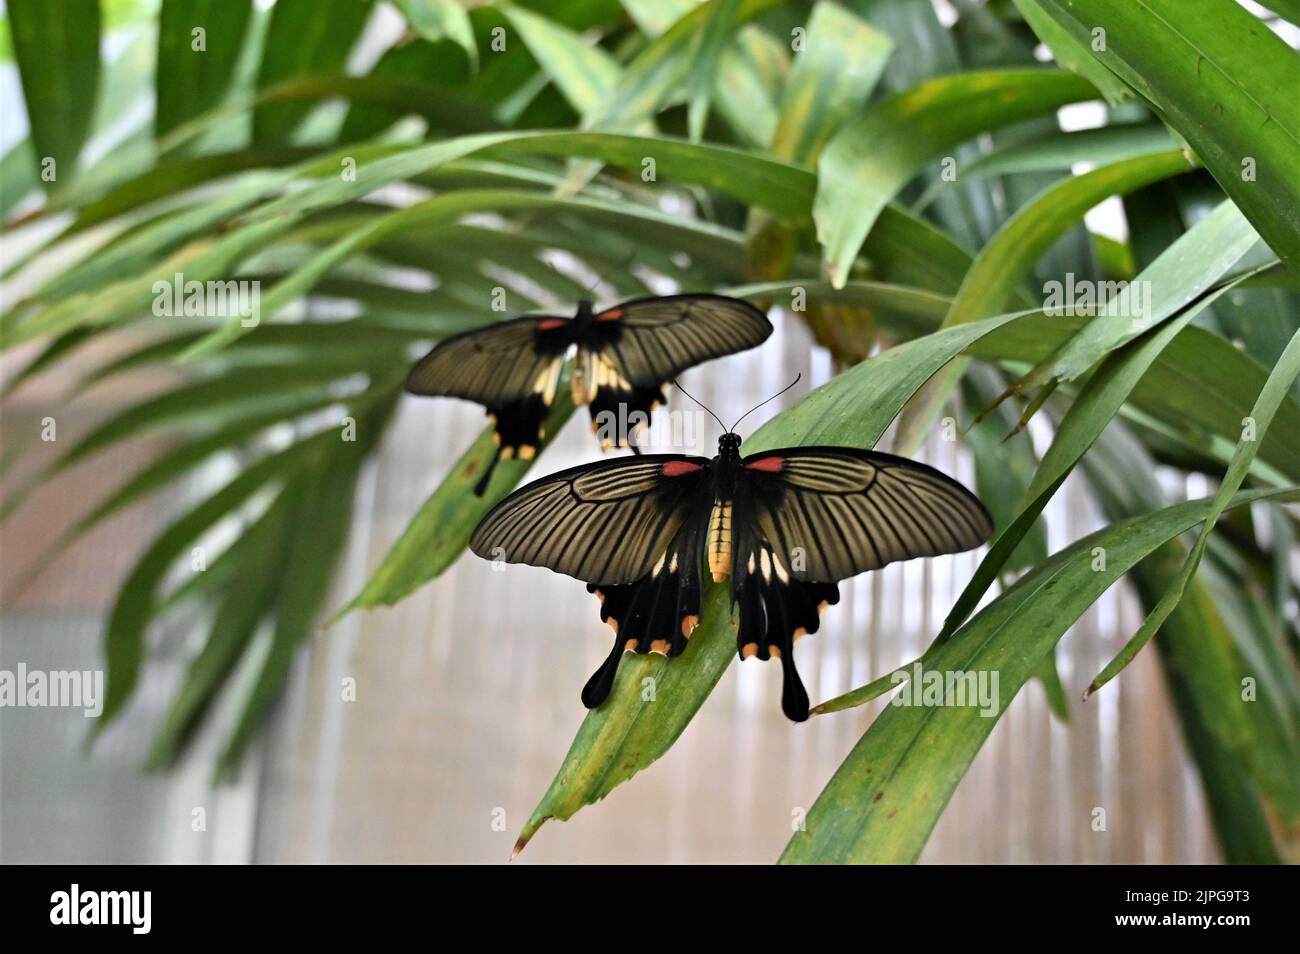 A close-up shot of two Papilio lowi butterflies on a plant leaves Stock Photo